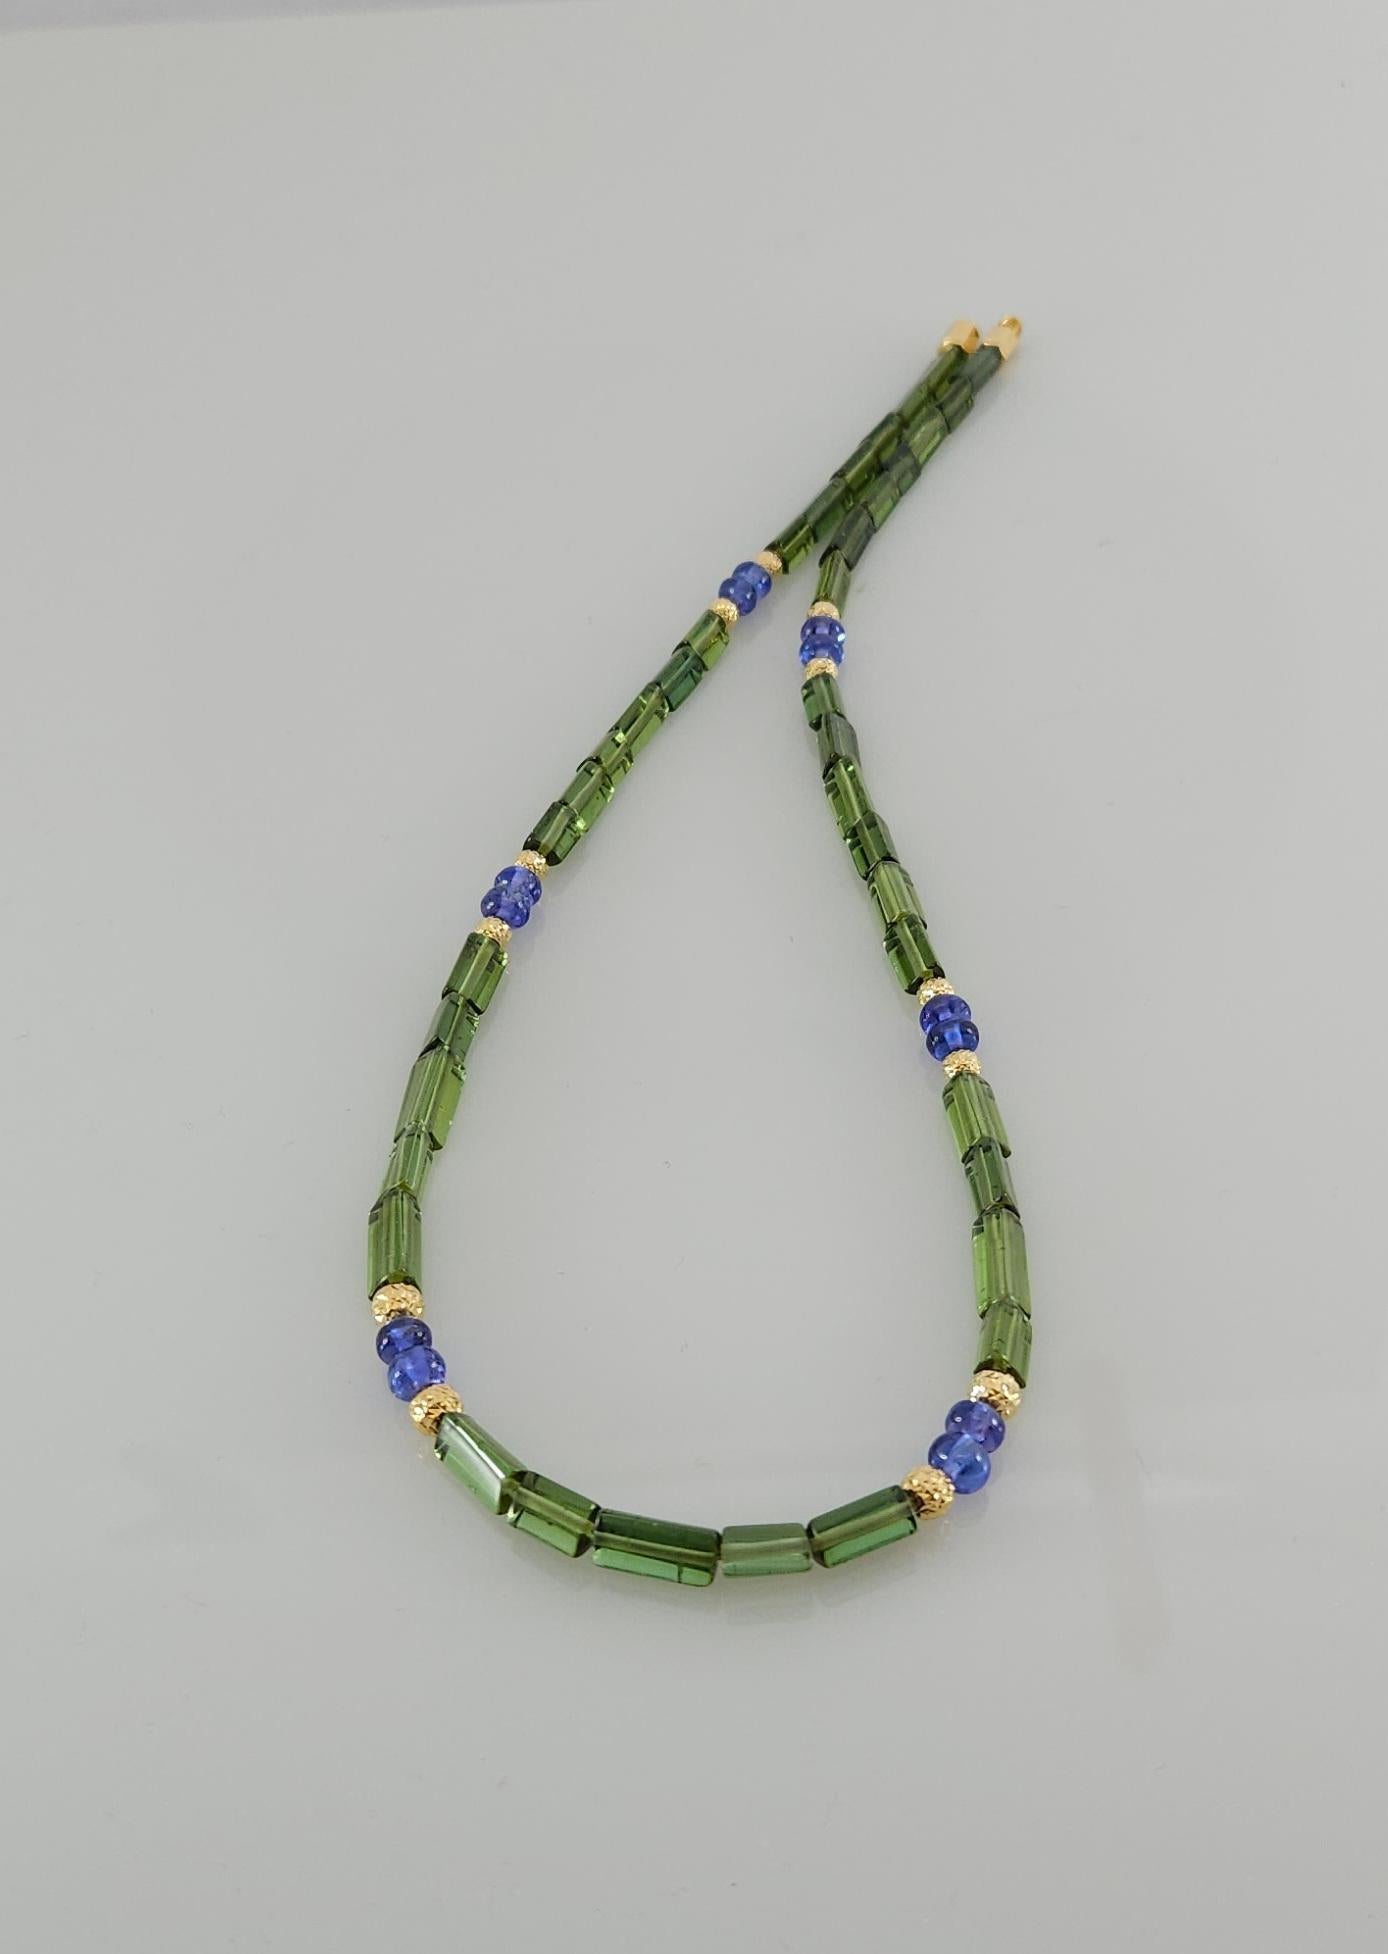 Green Tourmaline Crystal & Tanzanite Beaded Necklace with 18 Carat yellow Gold For Sale 3